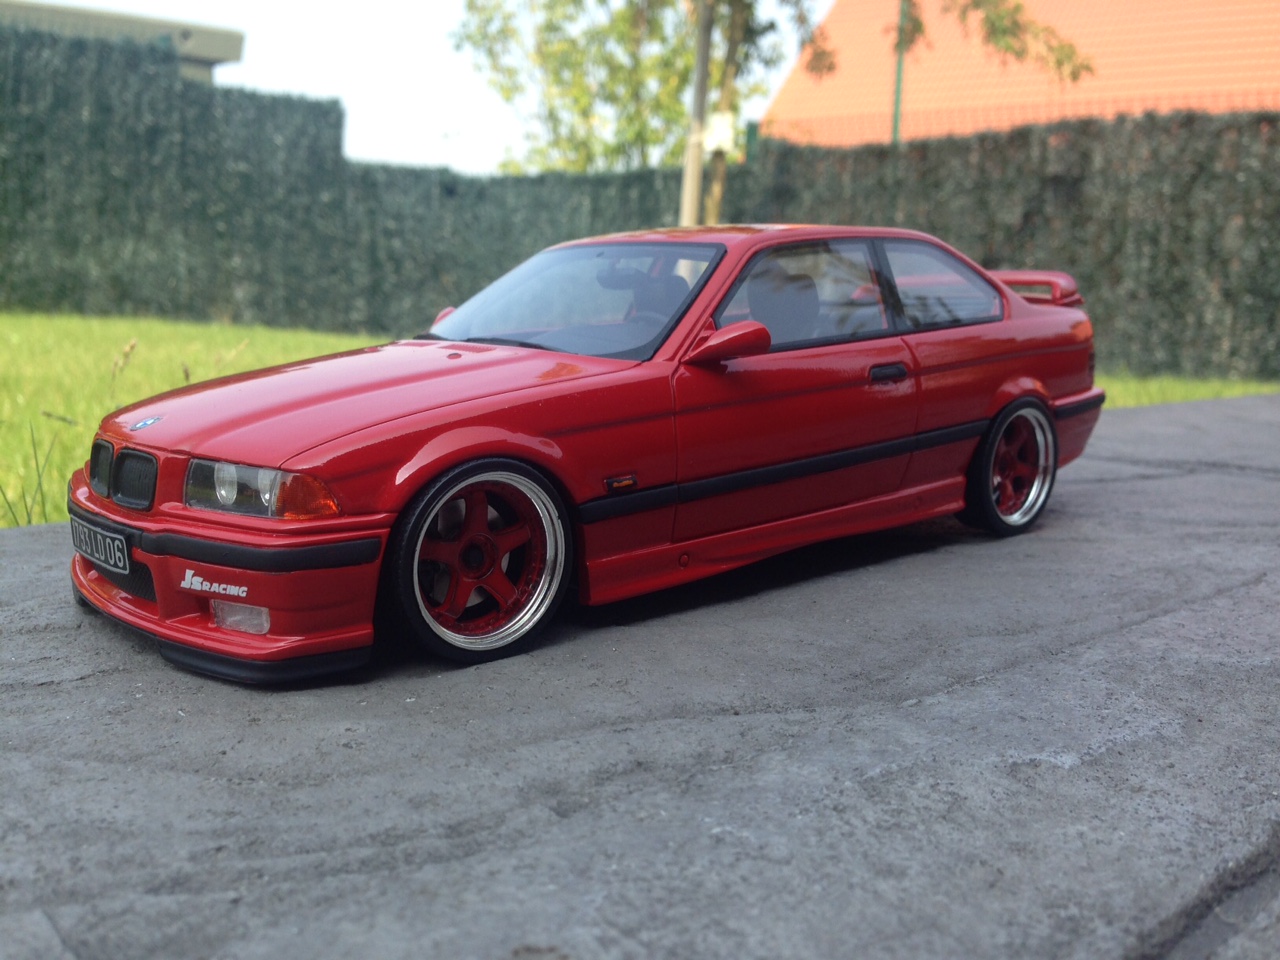 https://www.alldiecast.us/images/images_miniatures/BMW-M3-E36-Light-Weight-4.jpg